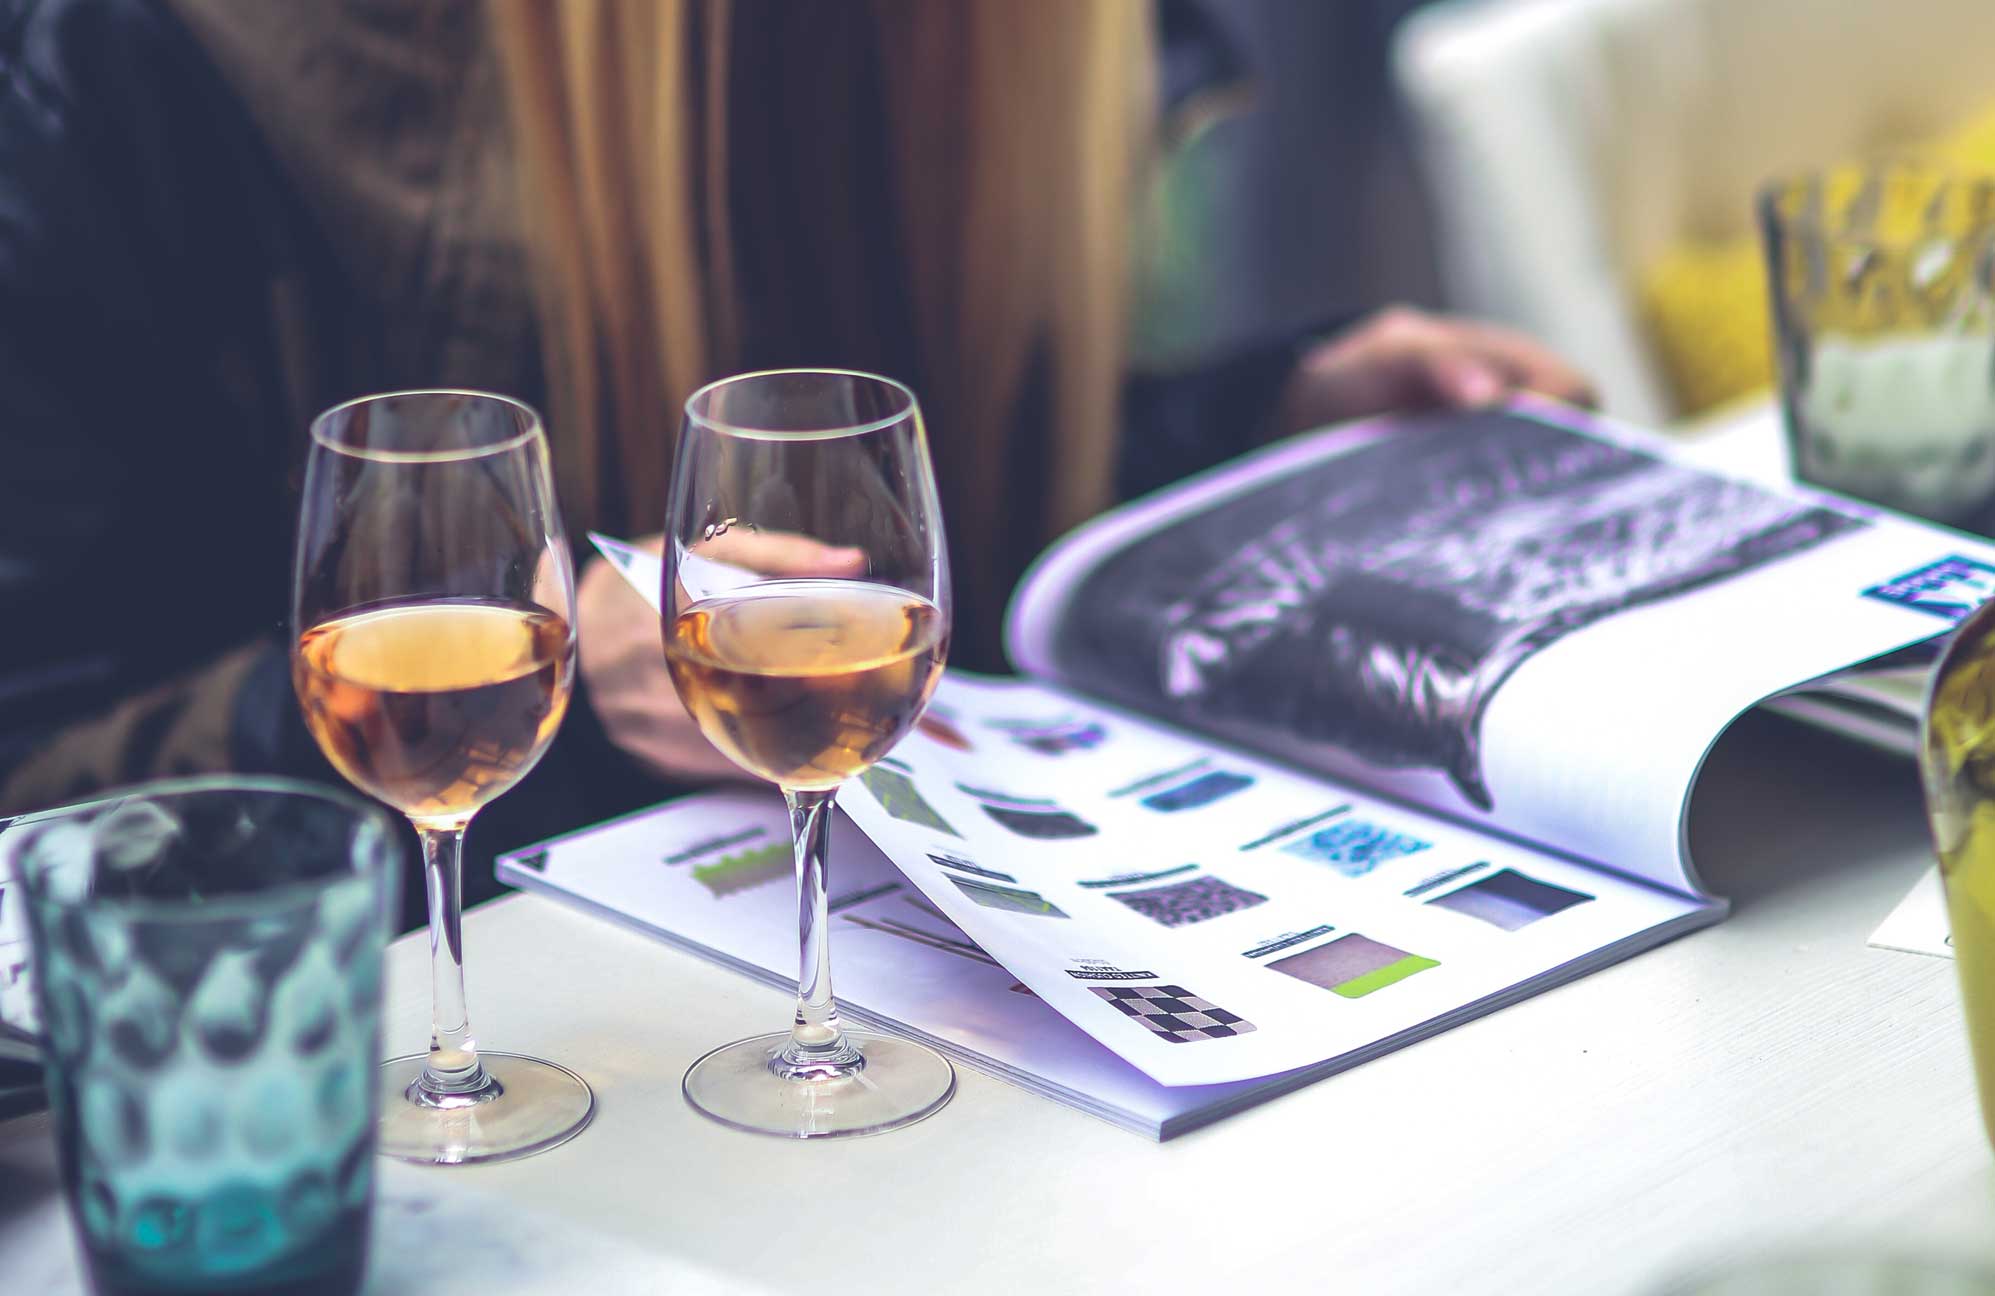 Two glasses of wine next to someone reading a magazine